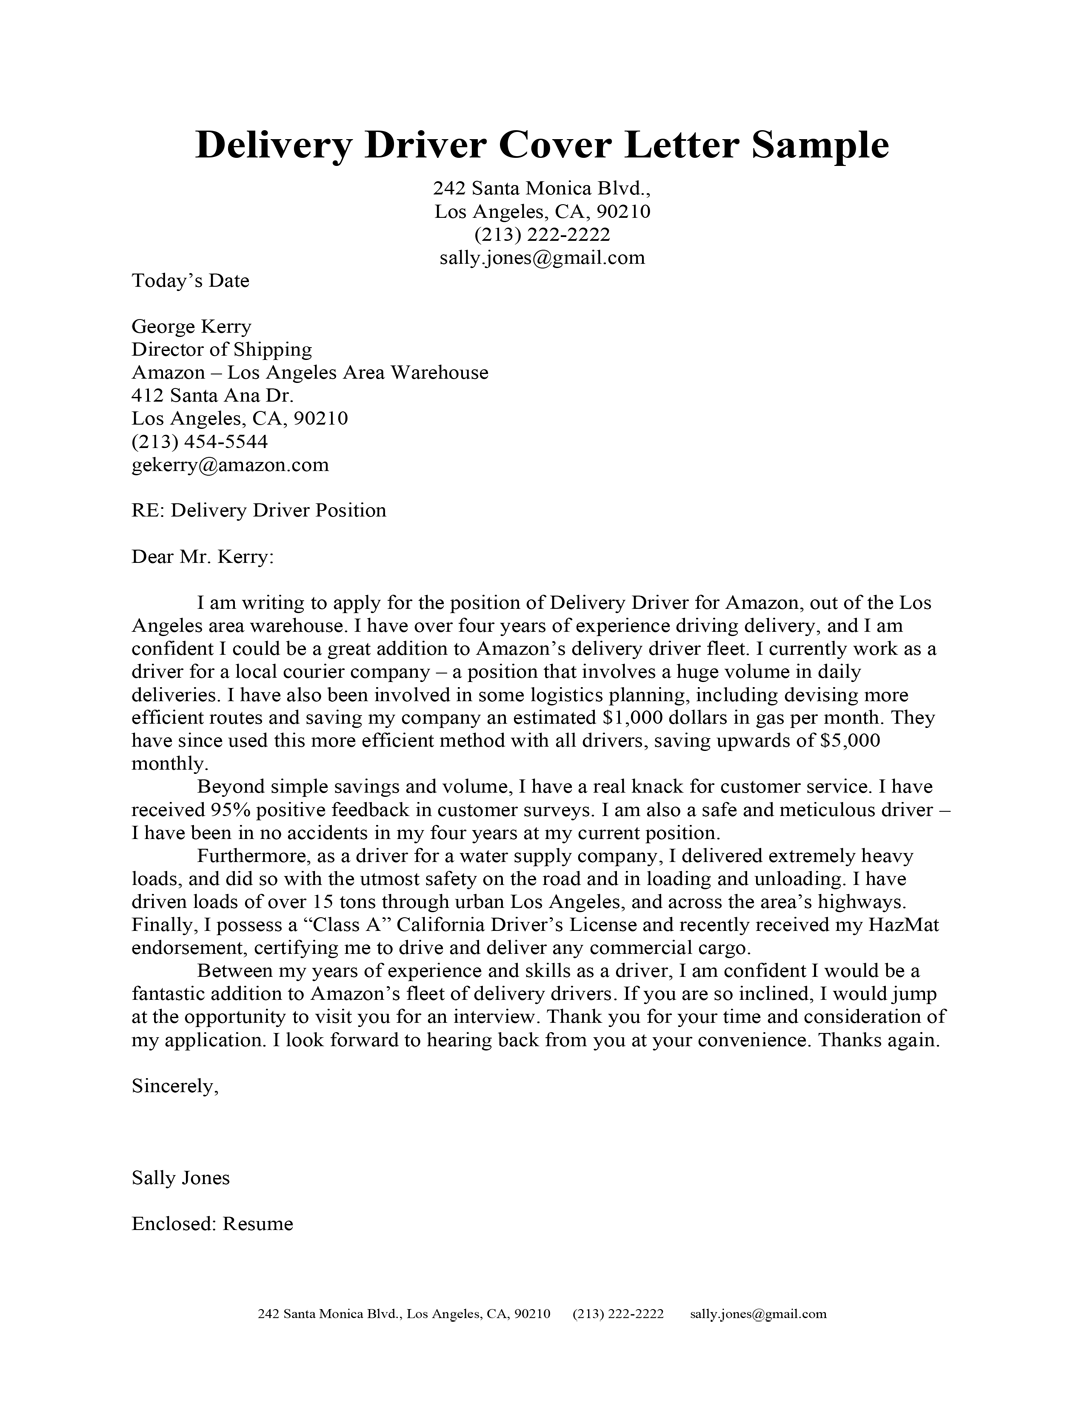 Sample Cover Letter For Reapplying For Same Position from resumecompanion.com